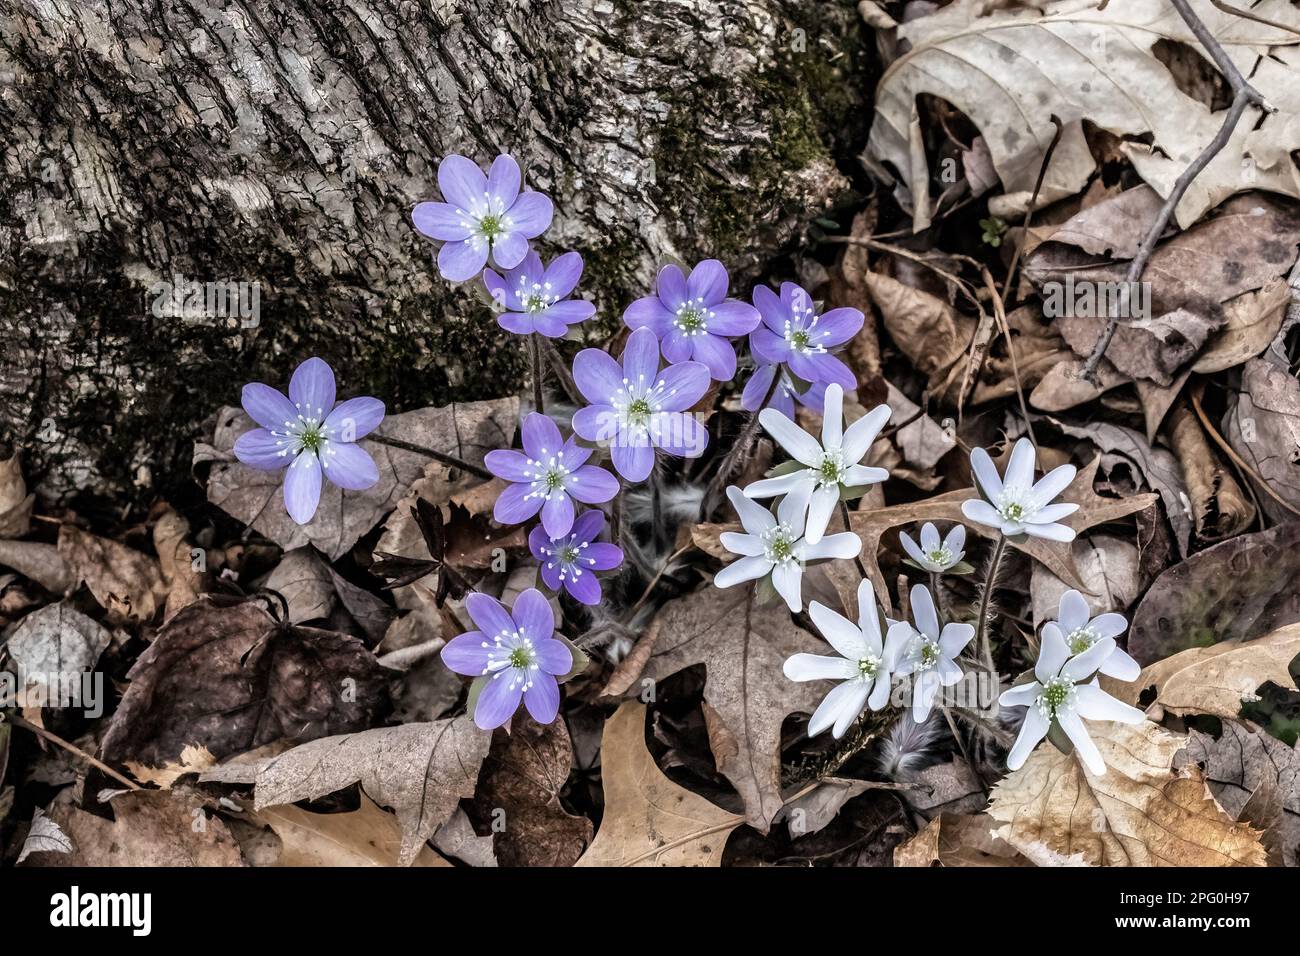 Purple and white hepatica wildflowers blooming in the springtime woods at Taylors Falls Lions Club South Park in Taylors Falls, Minnesota USA. Stock Photo